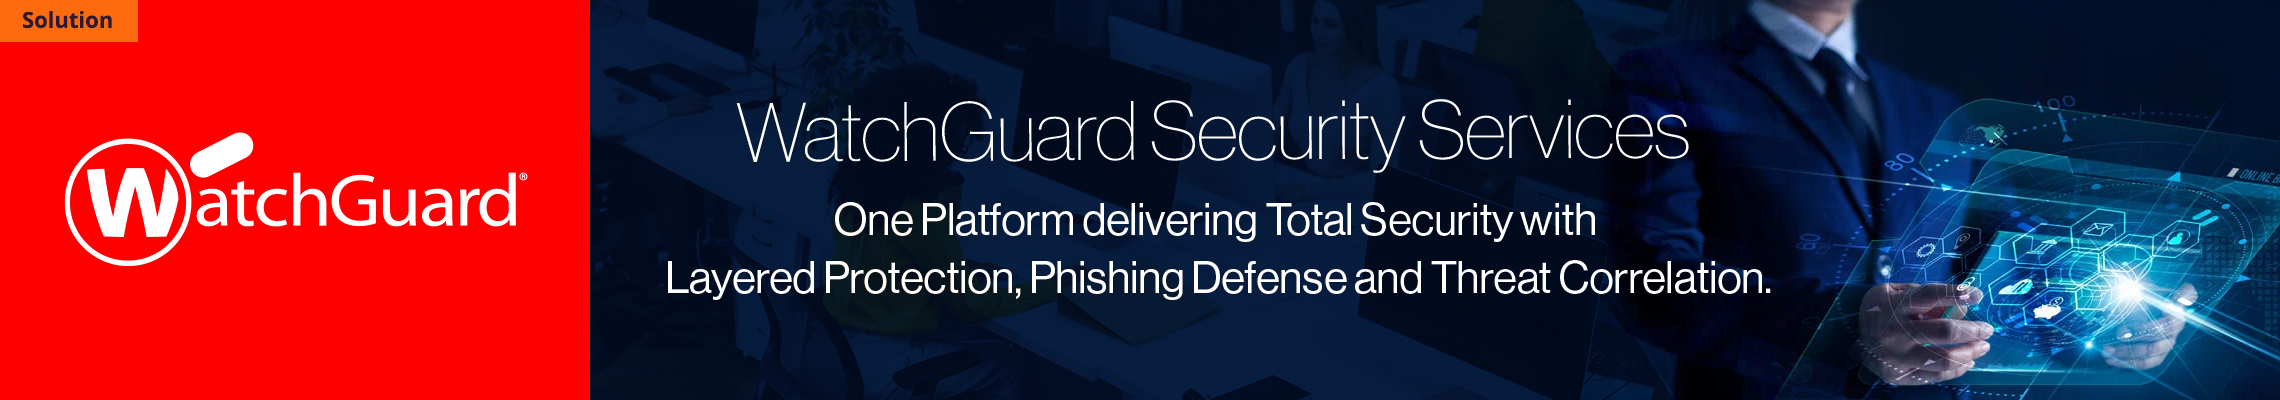 WatchGuard Security Services